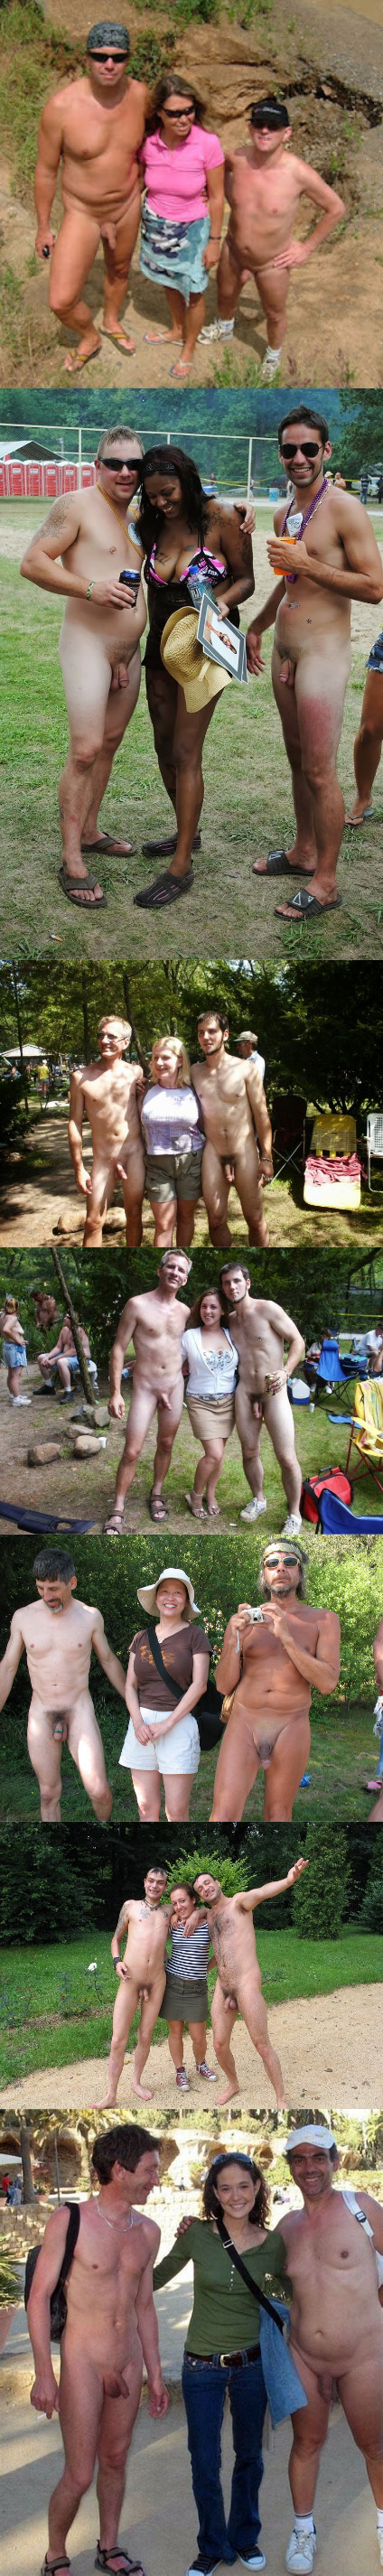 guys posing naked in public with clothed girls